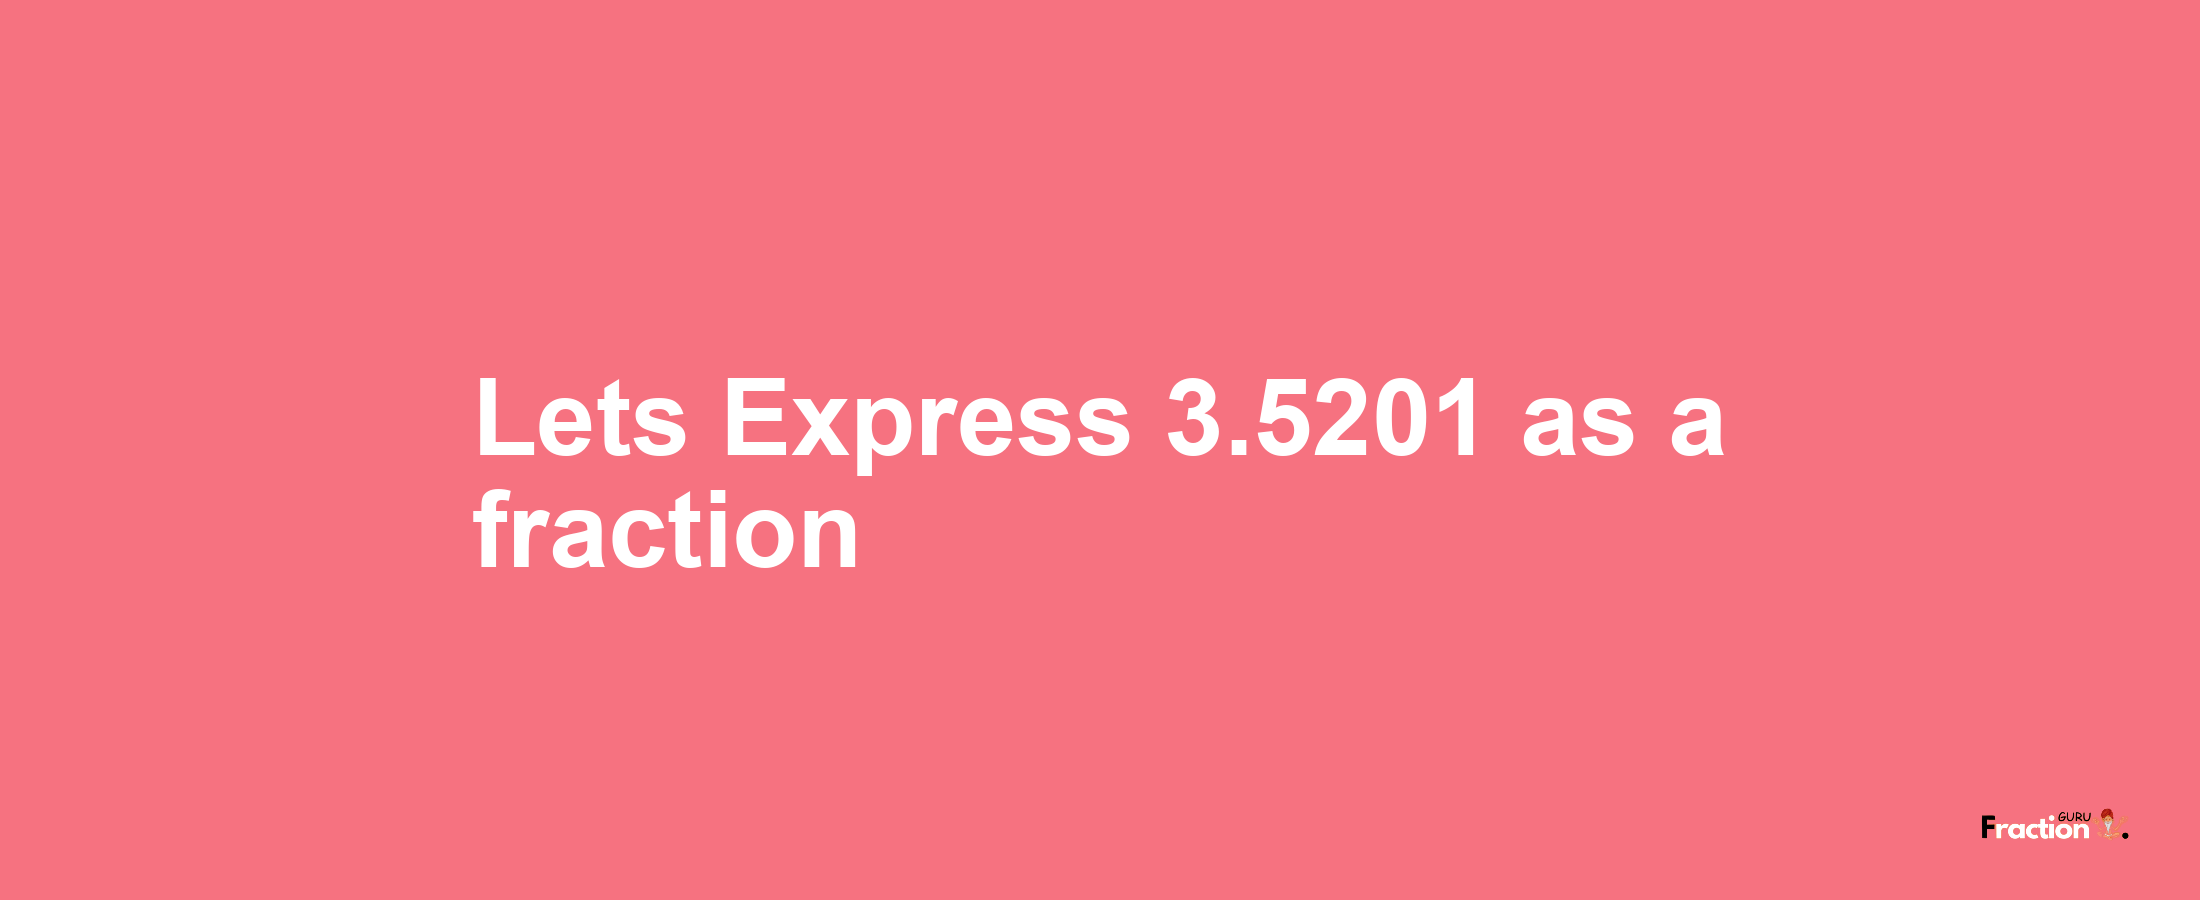 Lets Express 3.5201 as afraction